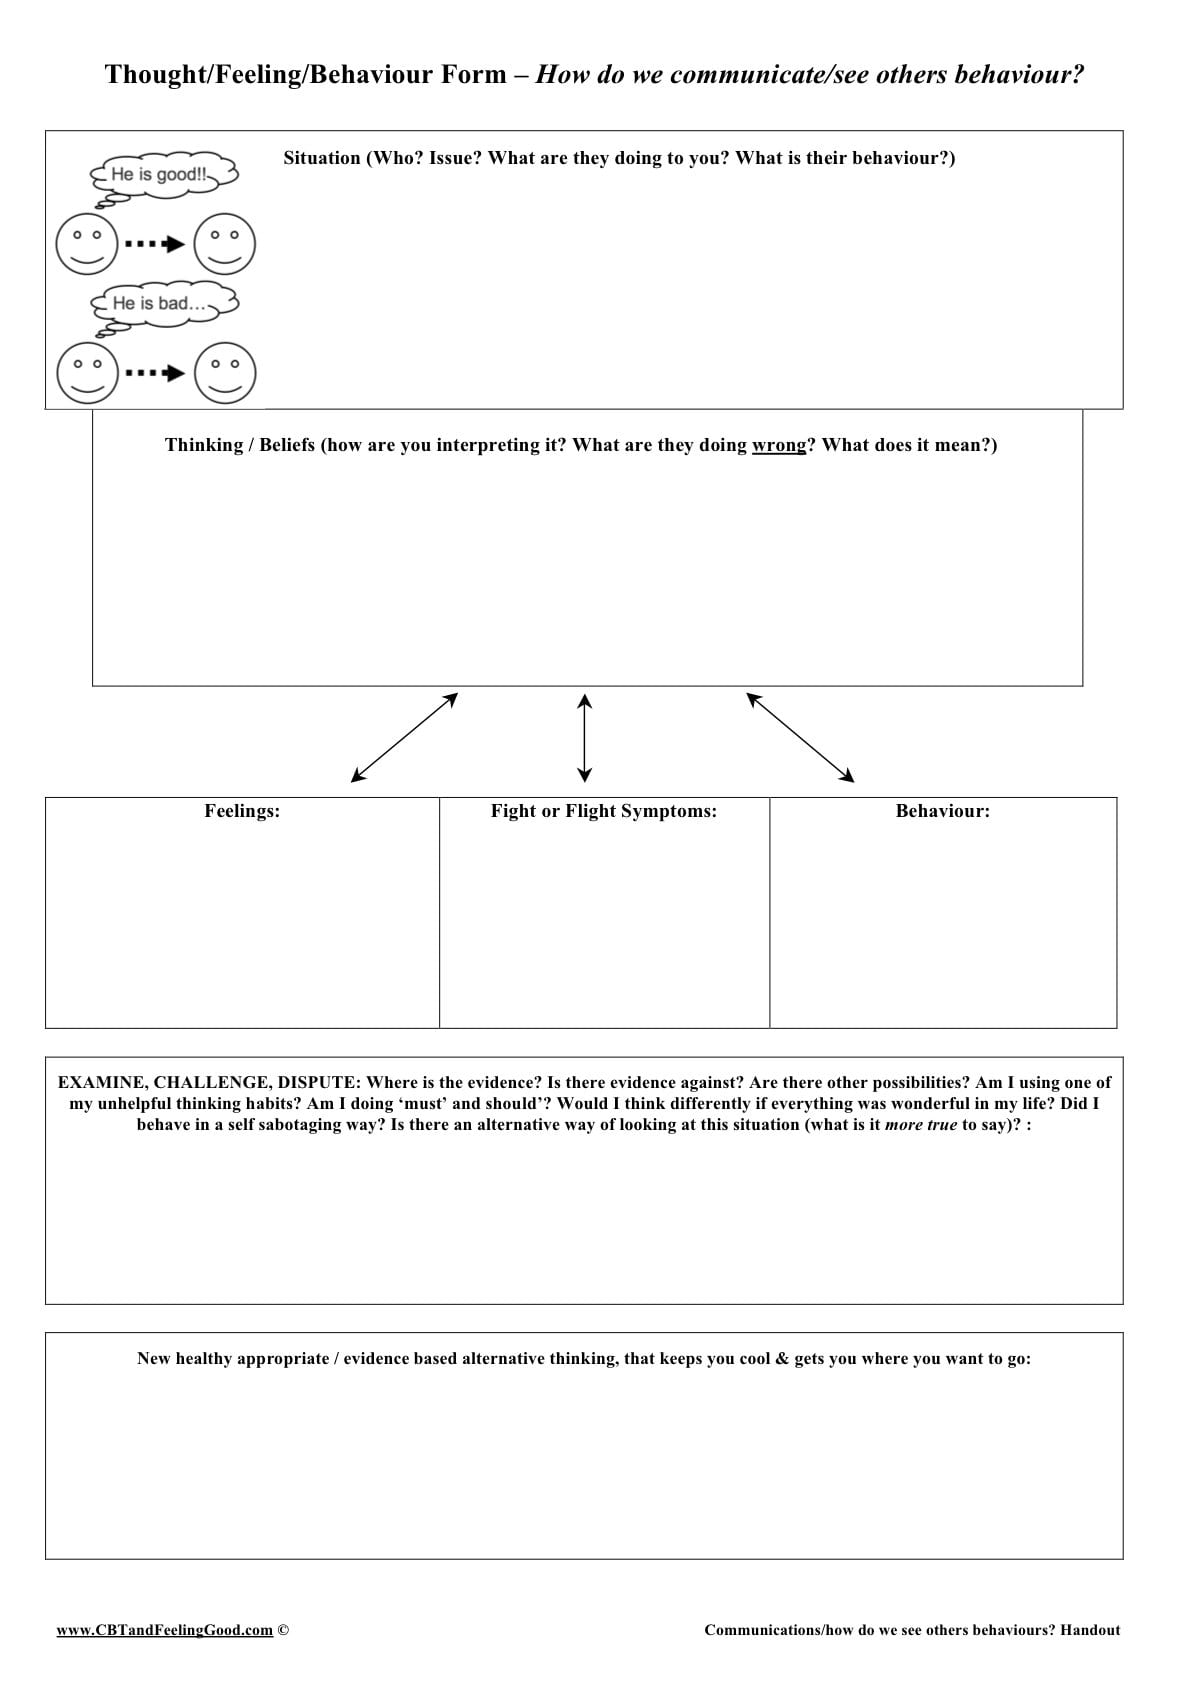 Cbt Dublin Ireland Worksheet – The Thoughtfeelingbehaviour Comms And Challenging Negative Thoughts Worksheet